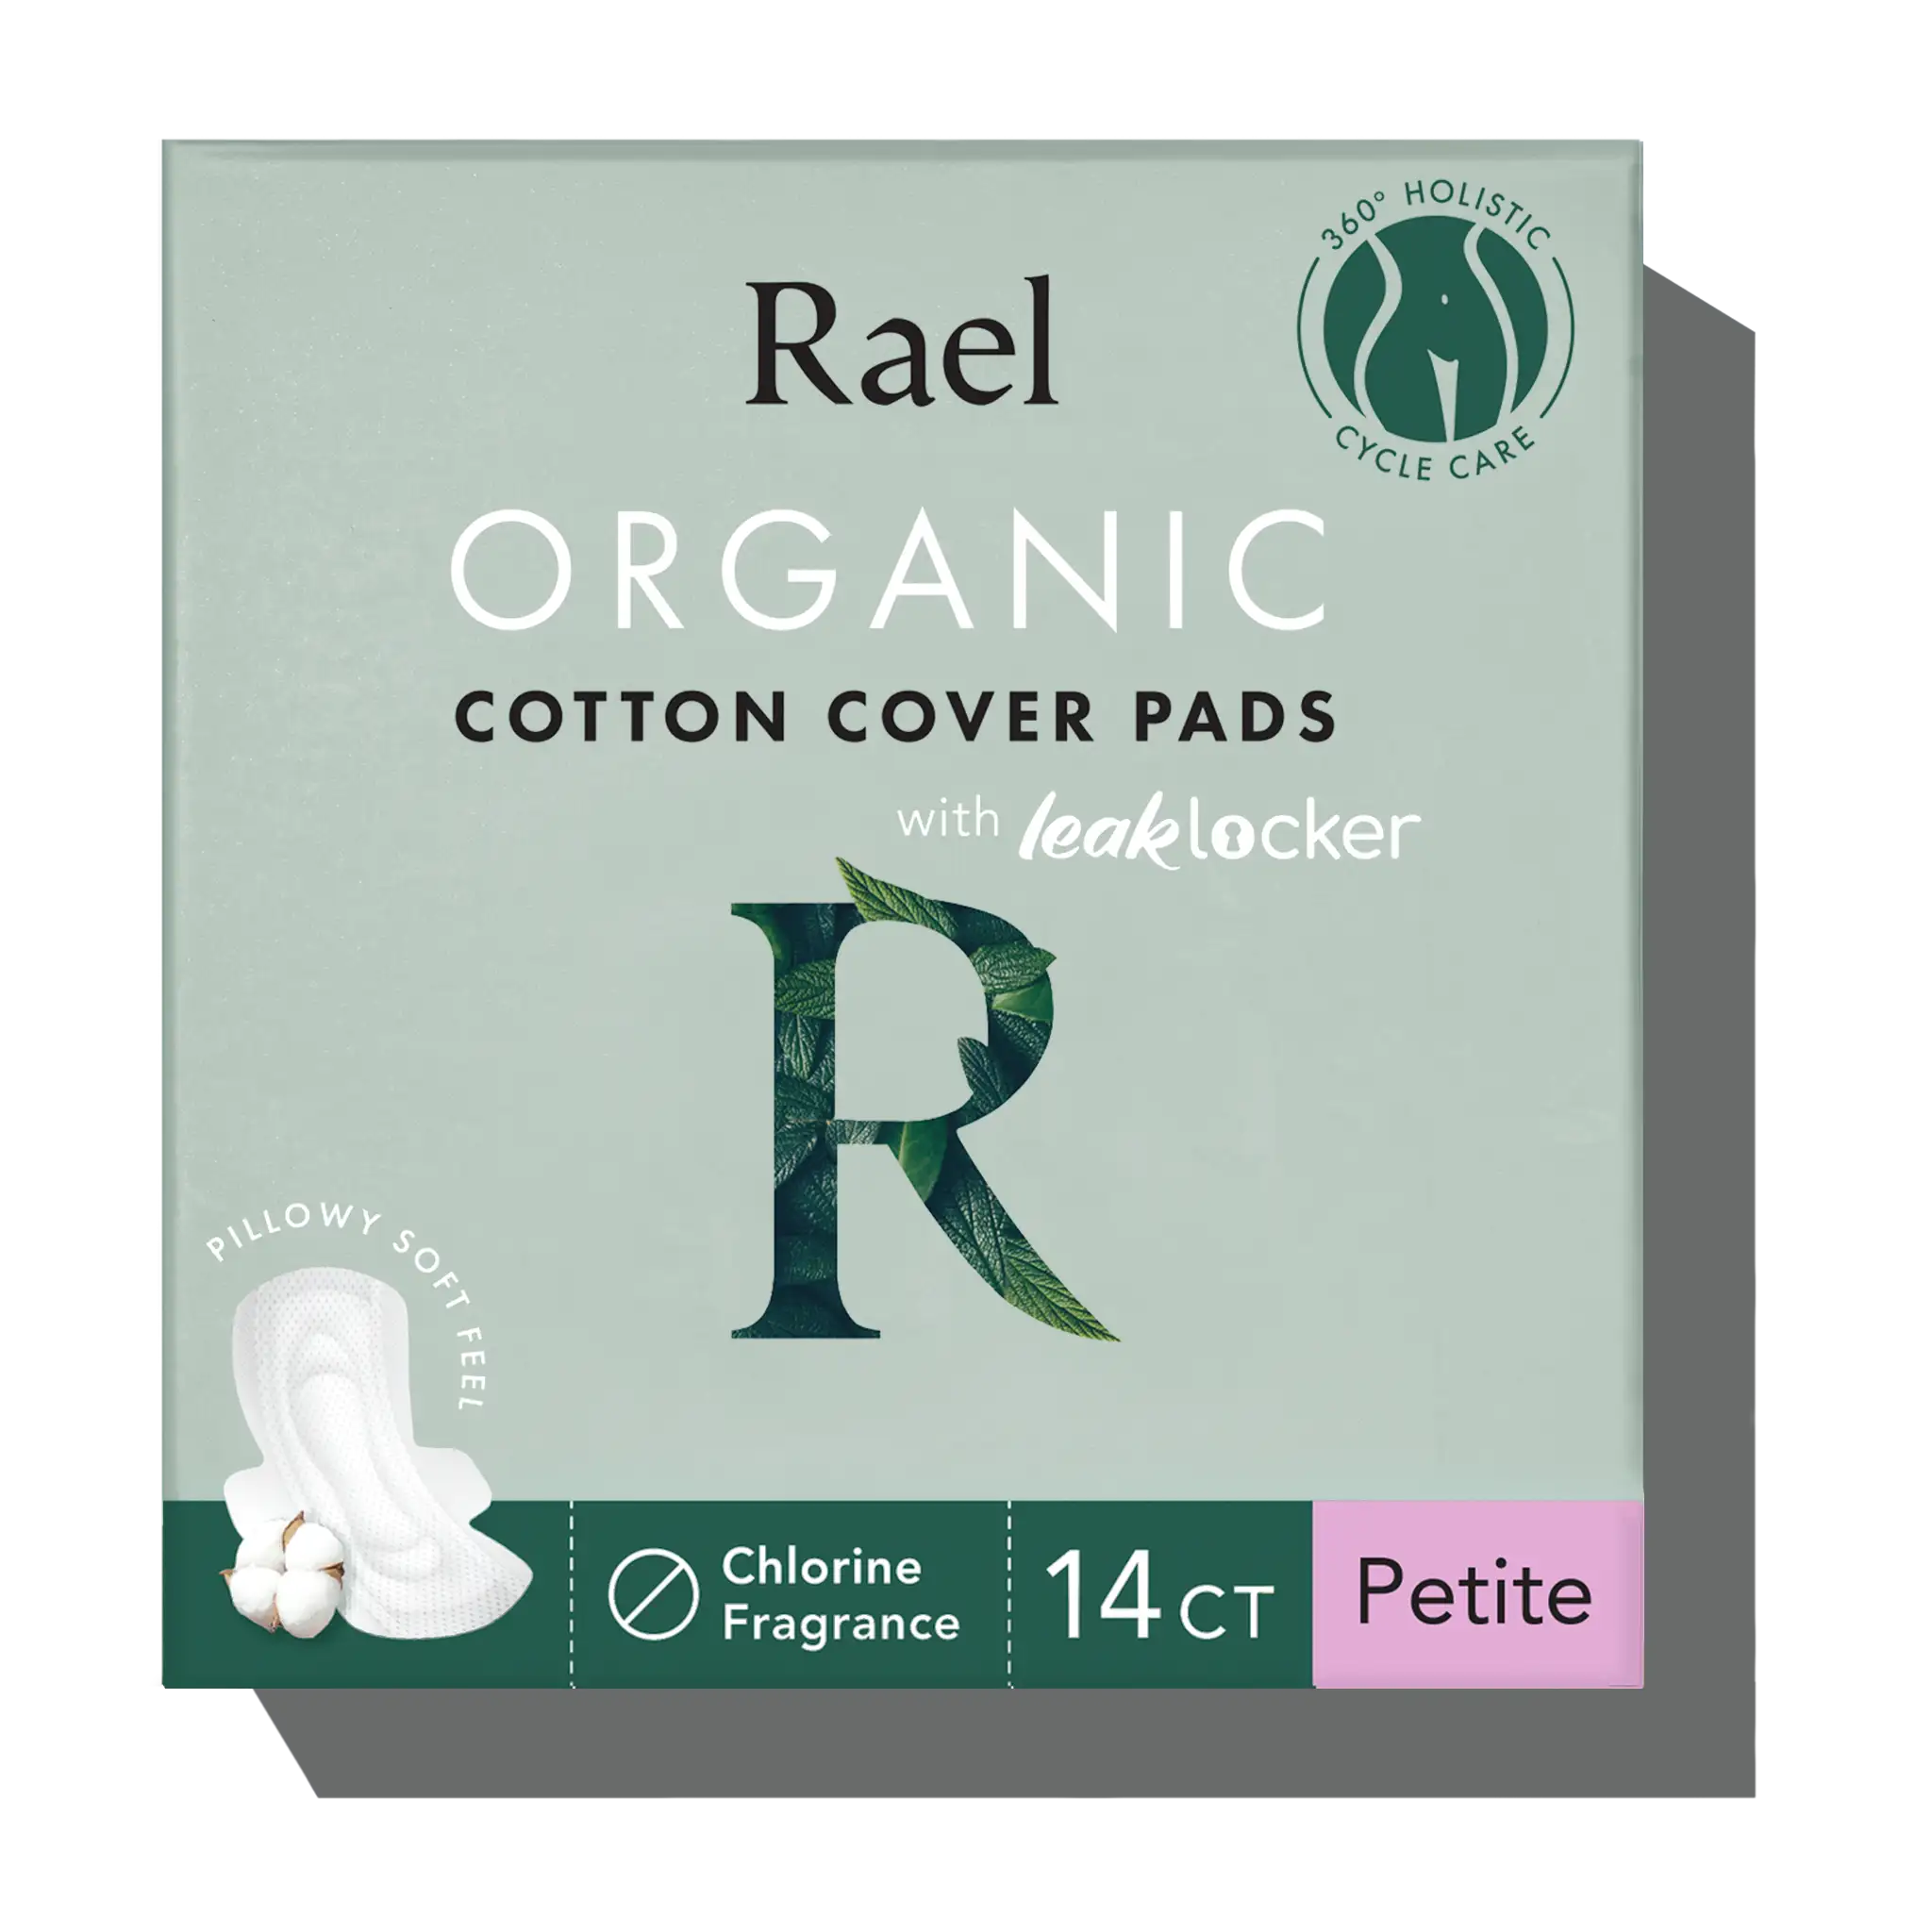 Rael Organic Cotton Cover Reusable Bladder Pads - Thin Cloth Pads, Leak Free, Washing Machine Safe, Incontinence Pads, 3 Count (Large, Natural)